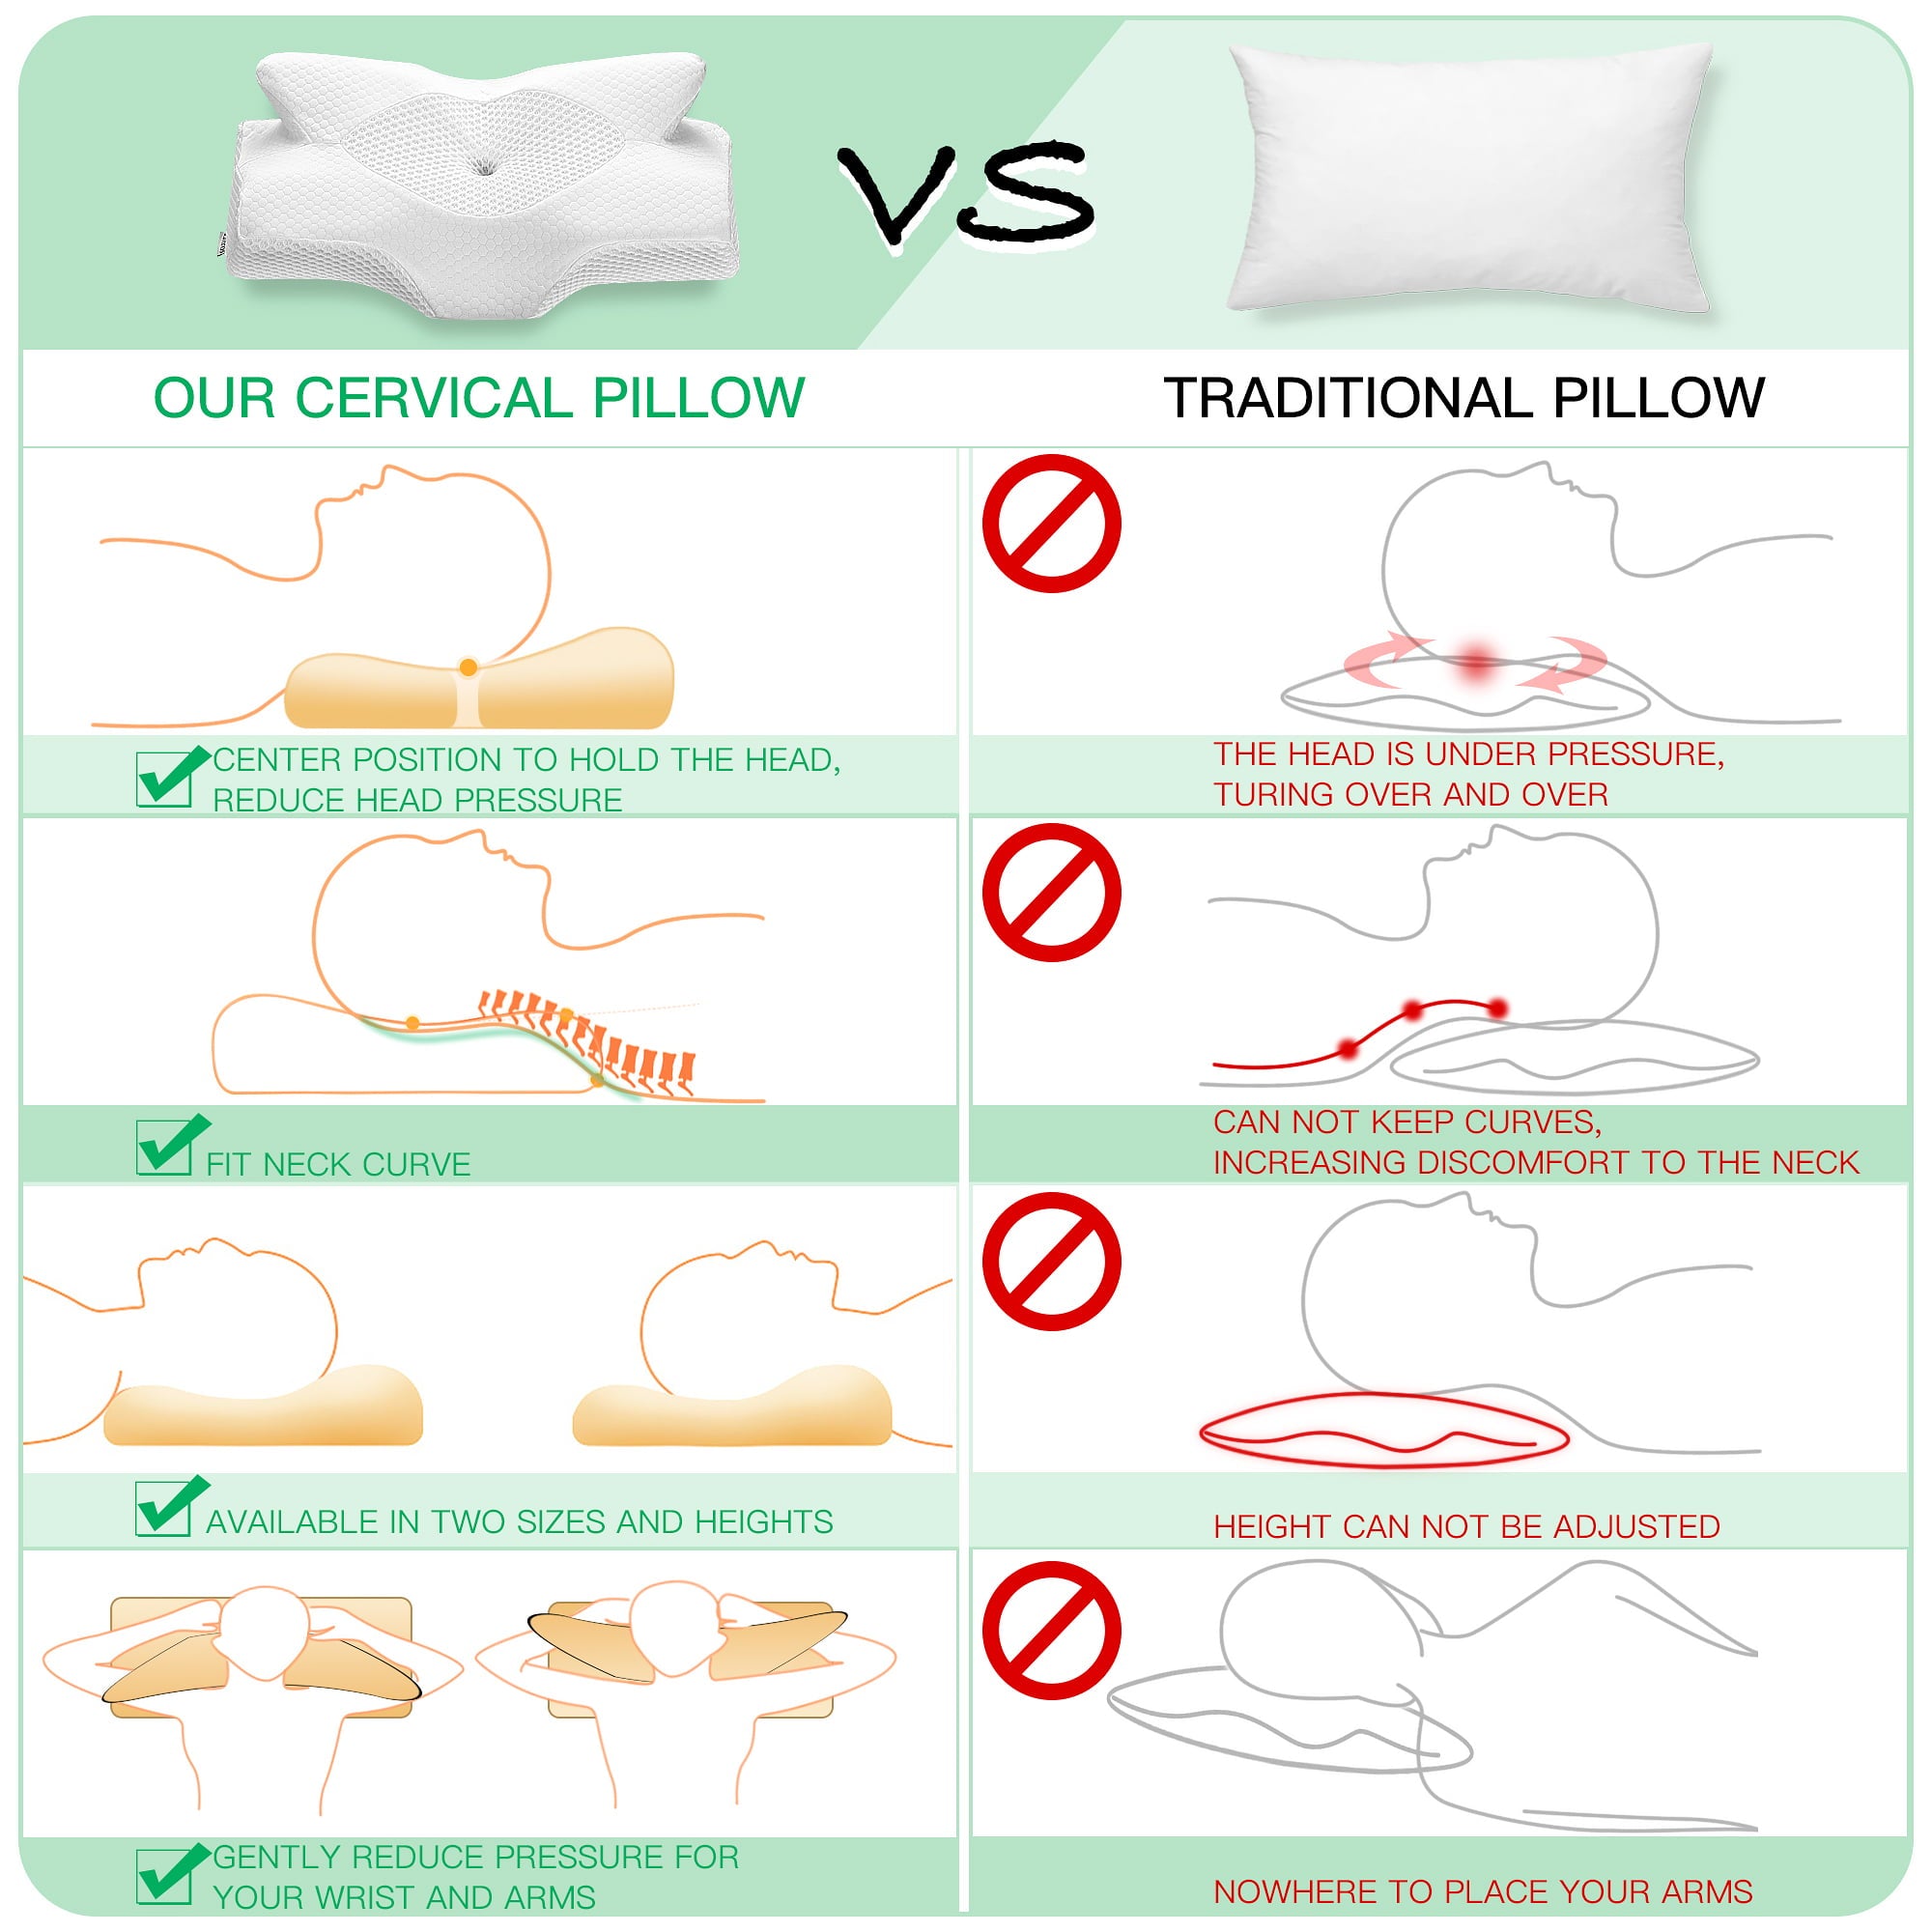 Elviros Cervical Memory Foam Pillow, Contour Pillows for Neck and Shoulder Pain, Ergonomic Orthopedic Sleeping Neck Contoured Support Pillow for Side Sleepers, Back and Stomach Sleepers (White)